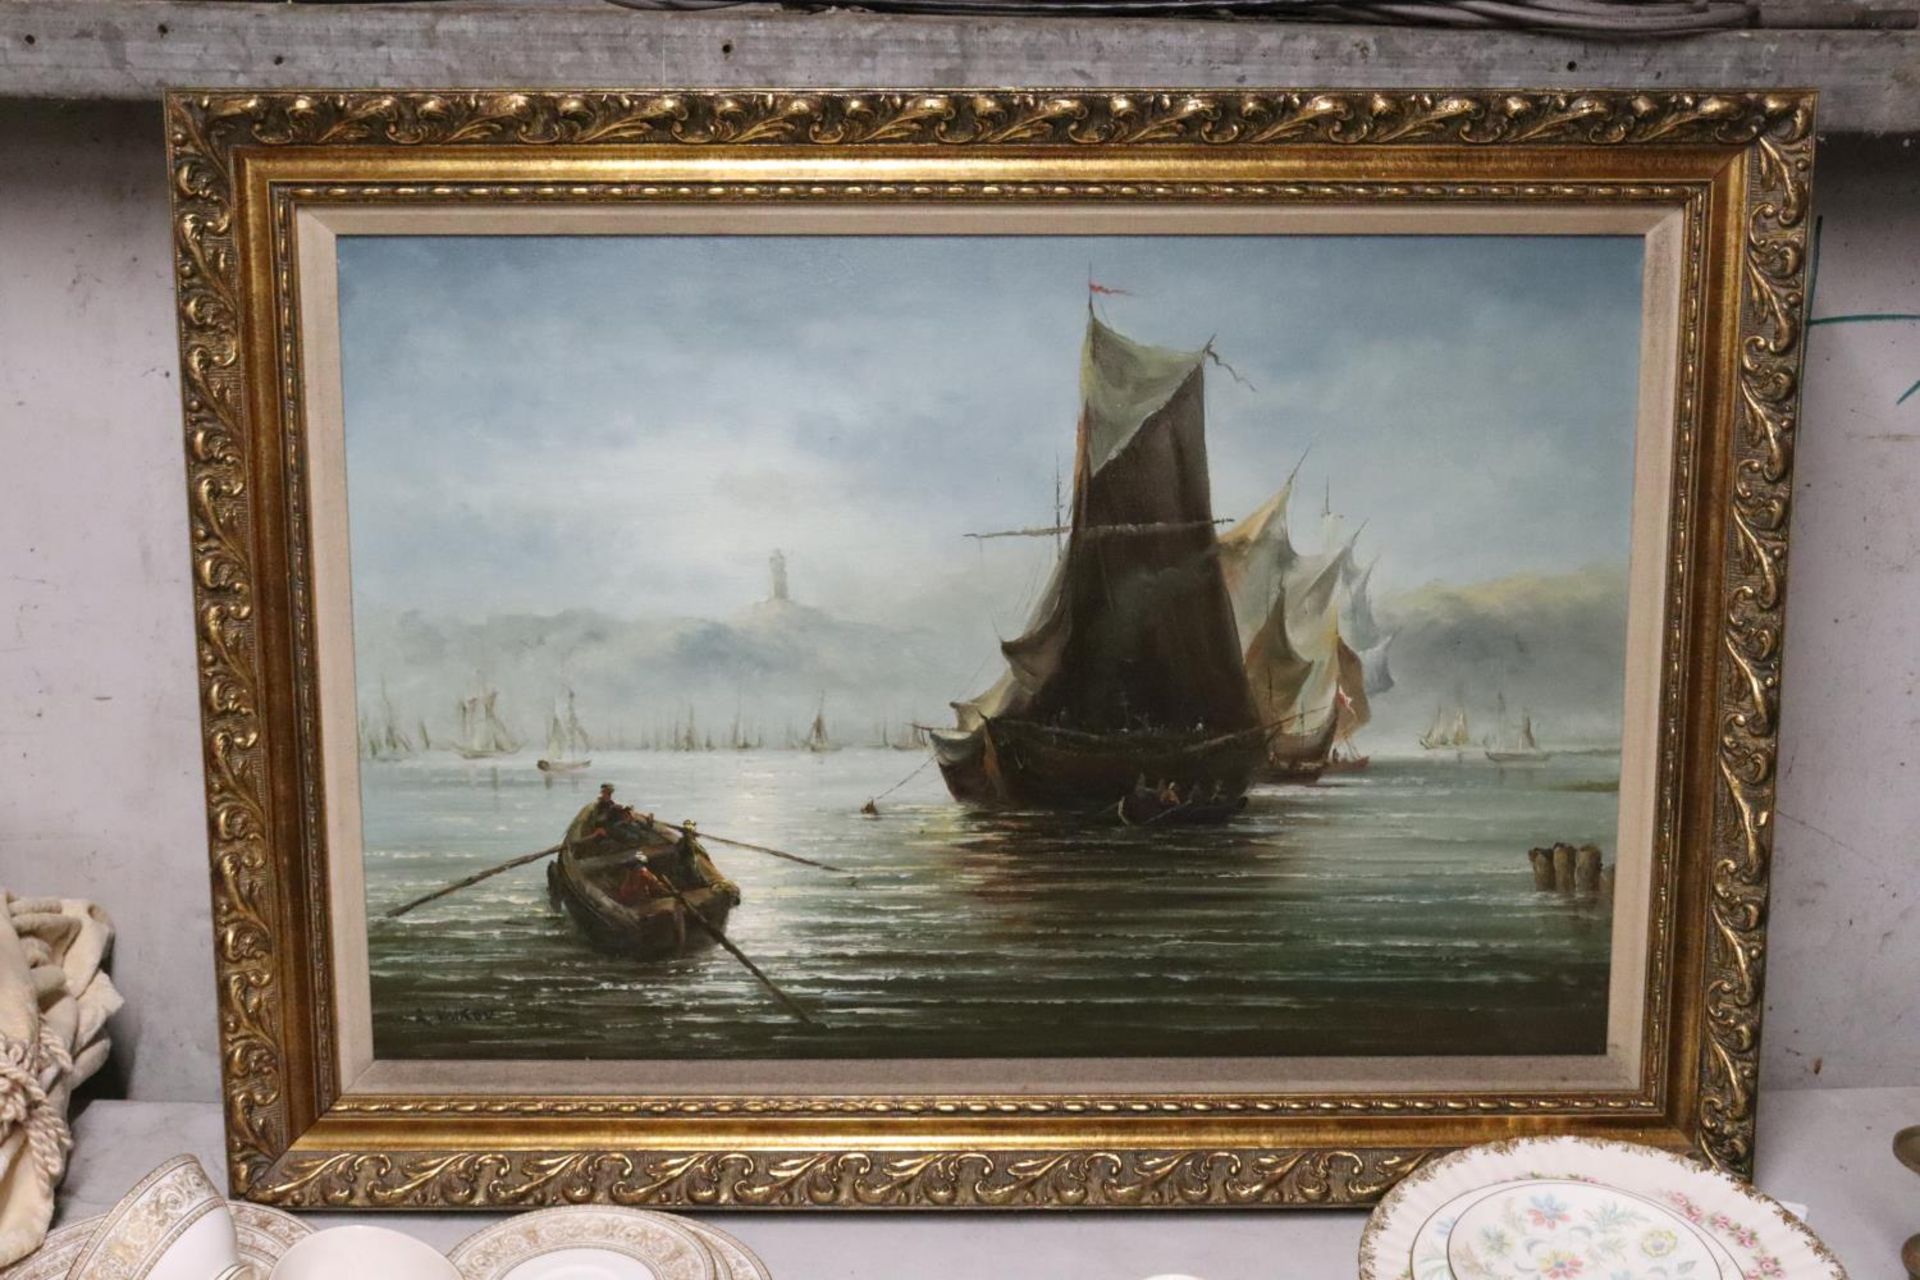 A LARGE OIL ON BOARD OF A MARITIME SCENE, IN A GILT FRAME, SIGNED R VOLKOV, 90CM X 65CM